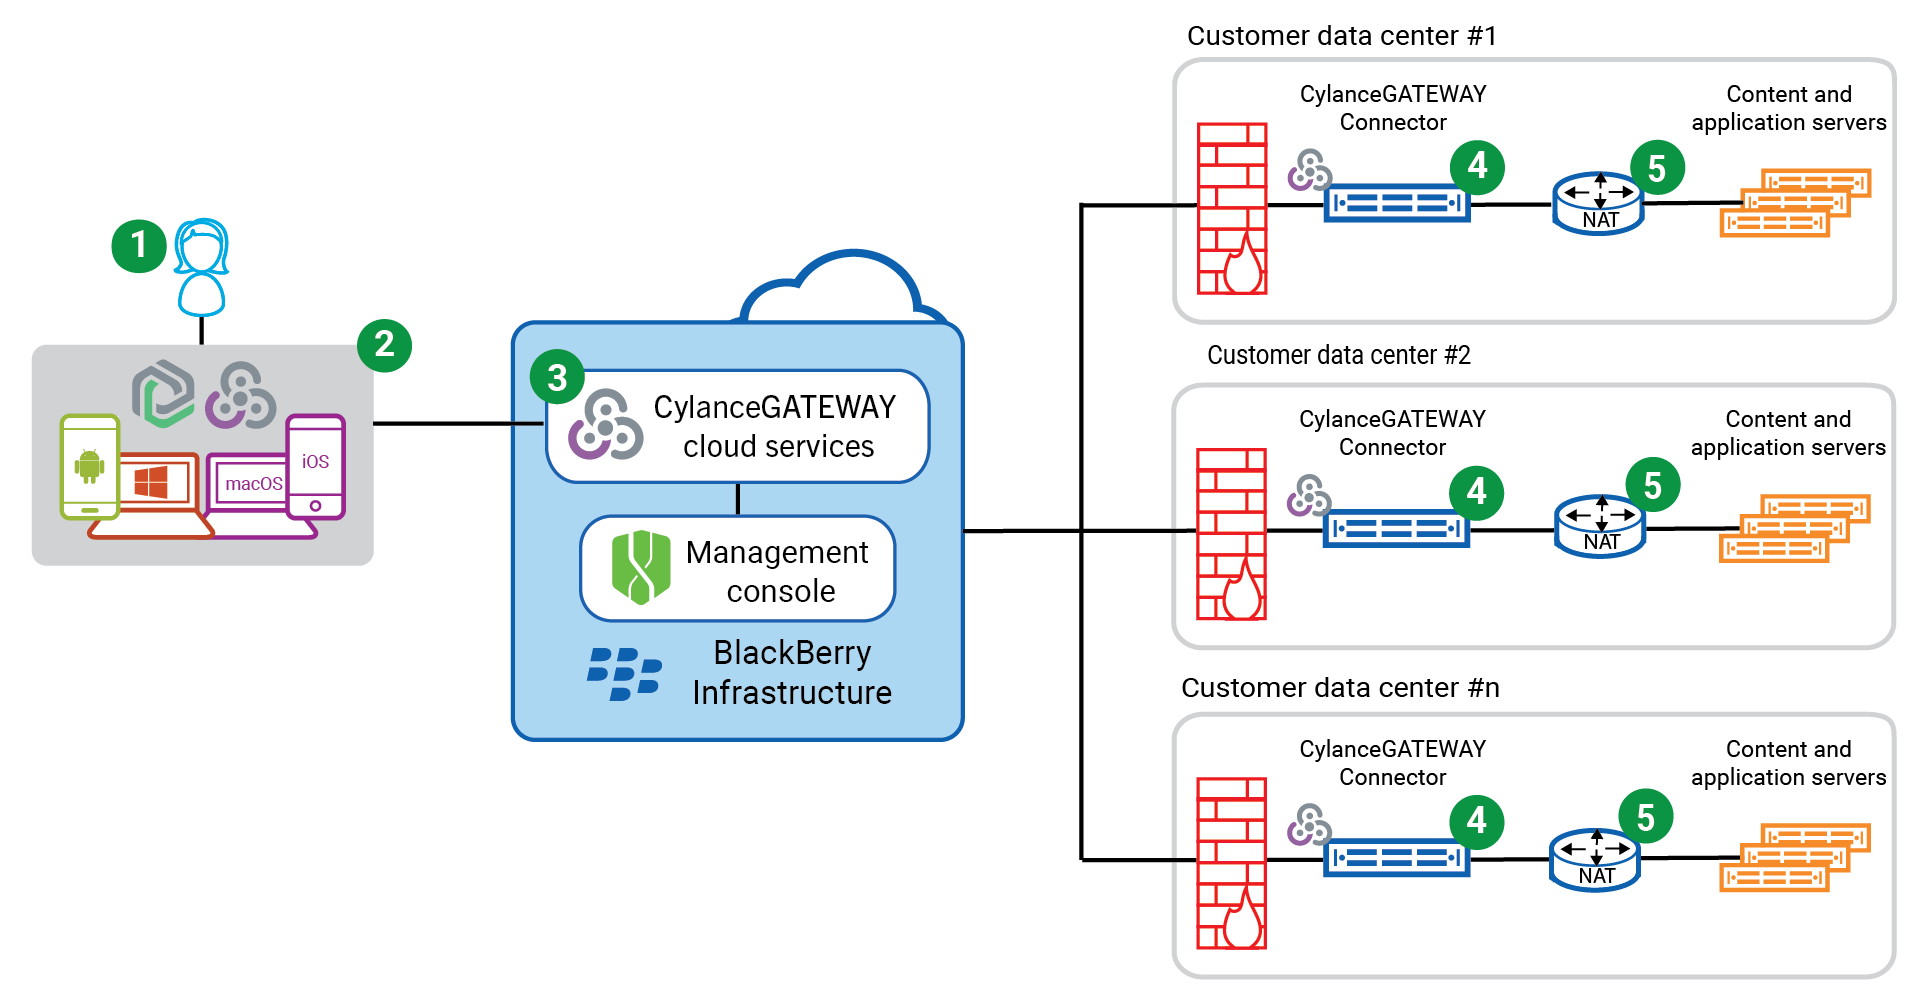 This image demonstrates the flow of data when using CylanceGATEWAY to access an app or content server on your private network with a multiple private network configuration.